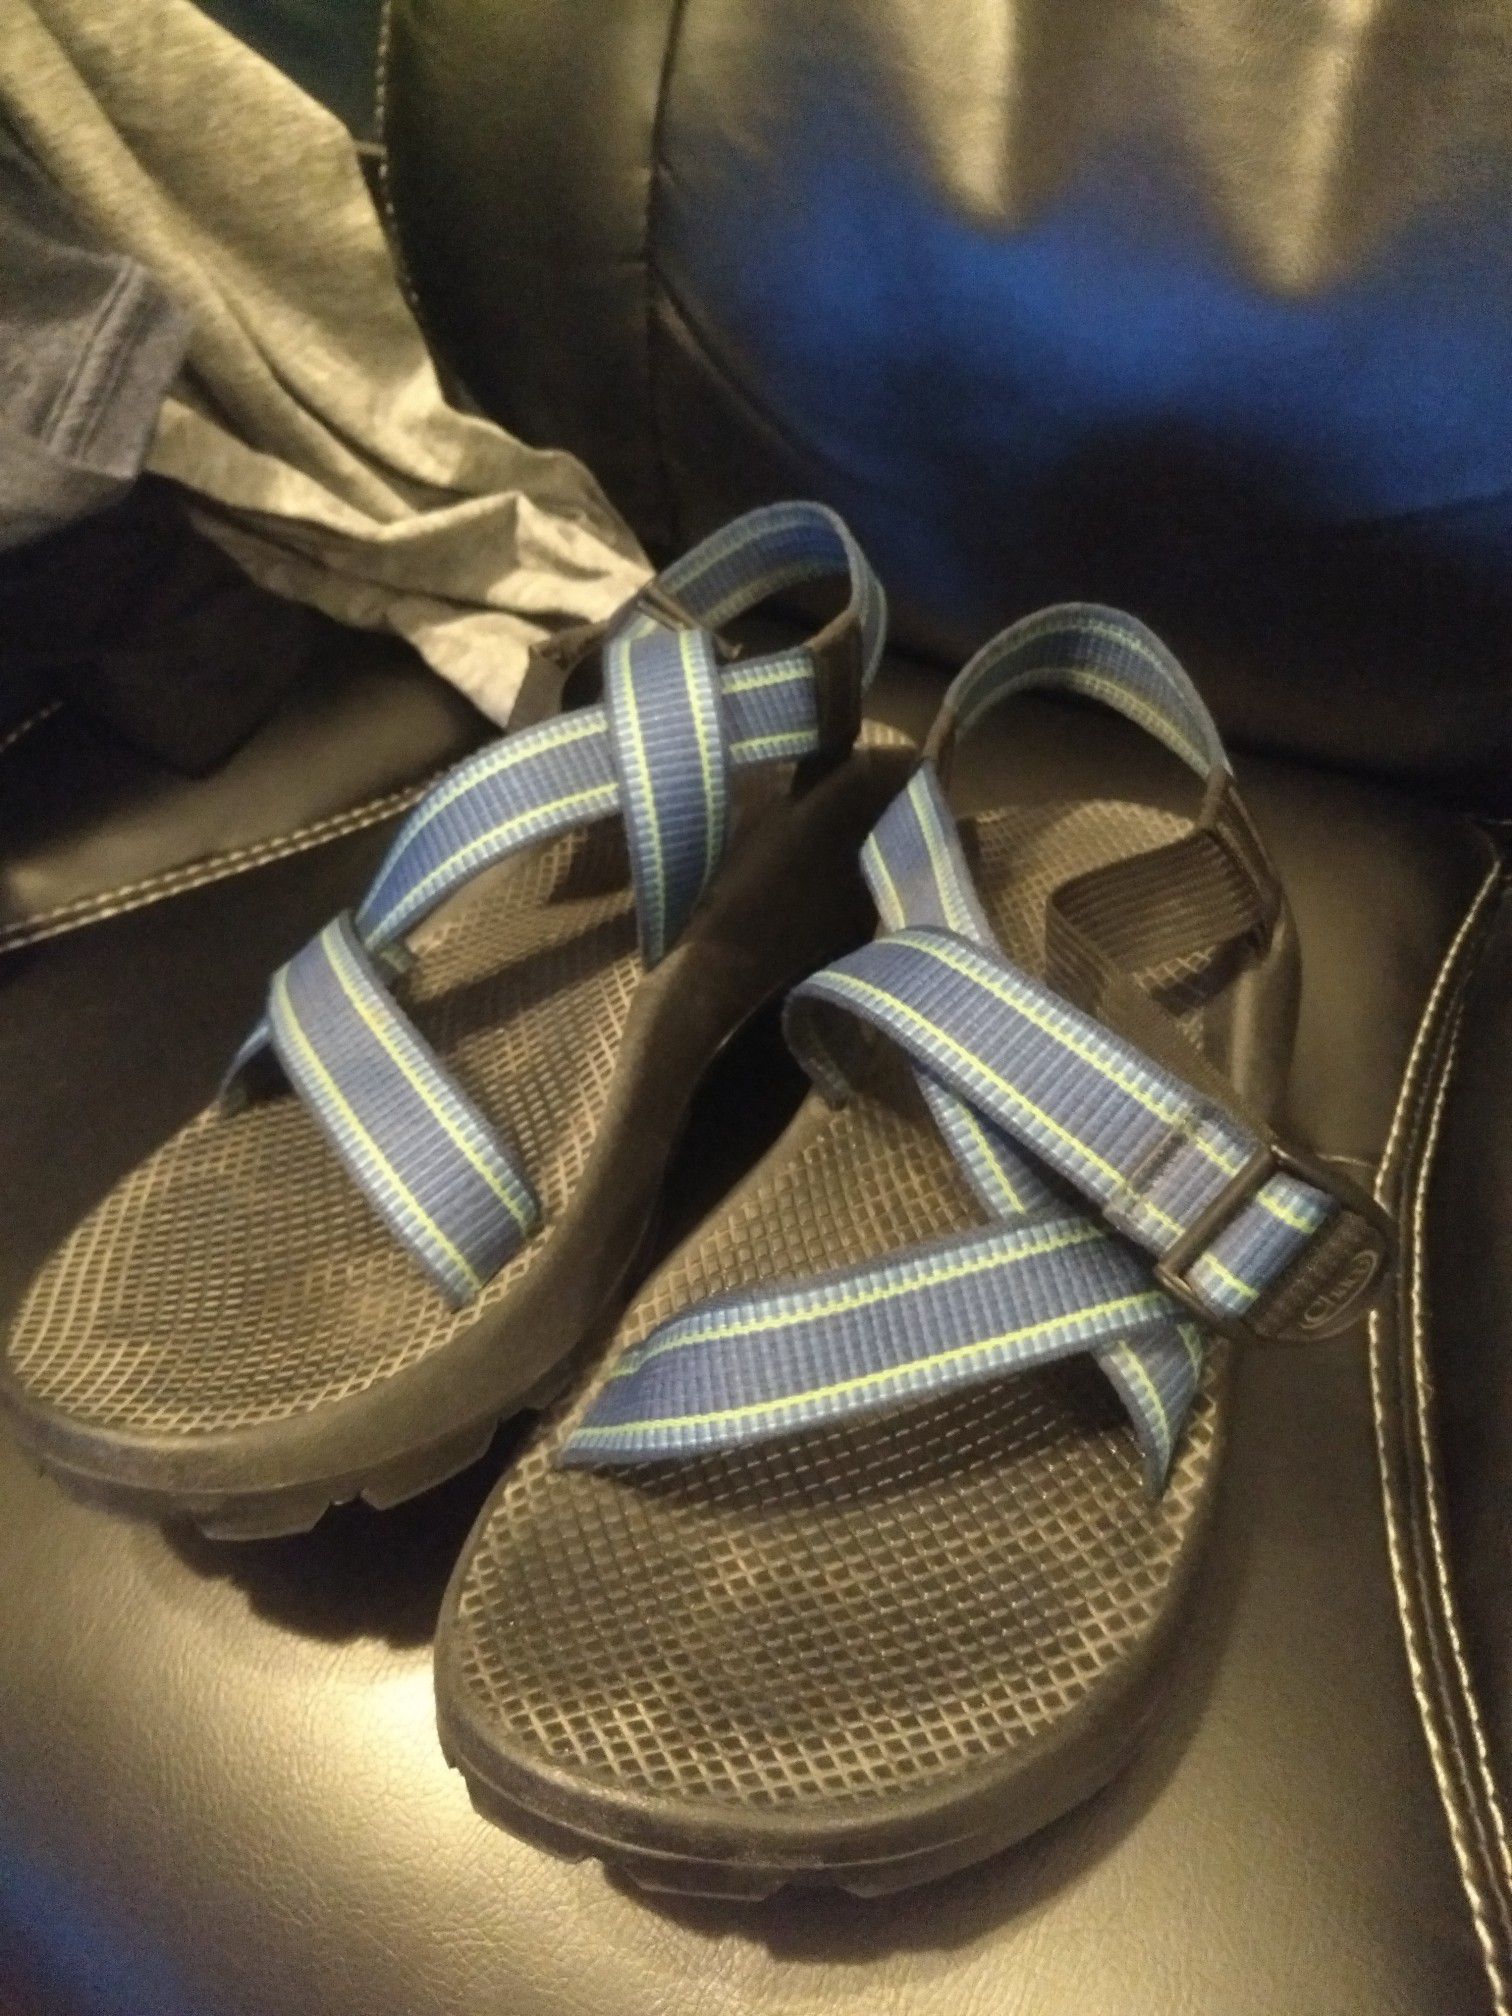 Chacos size 11